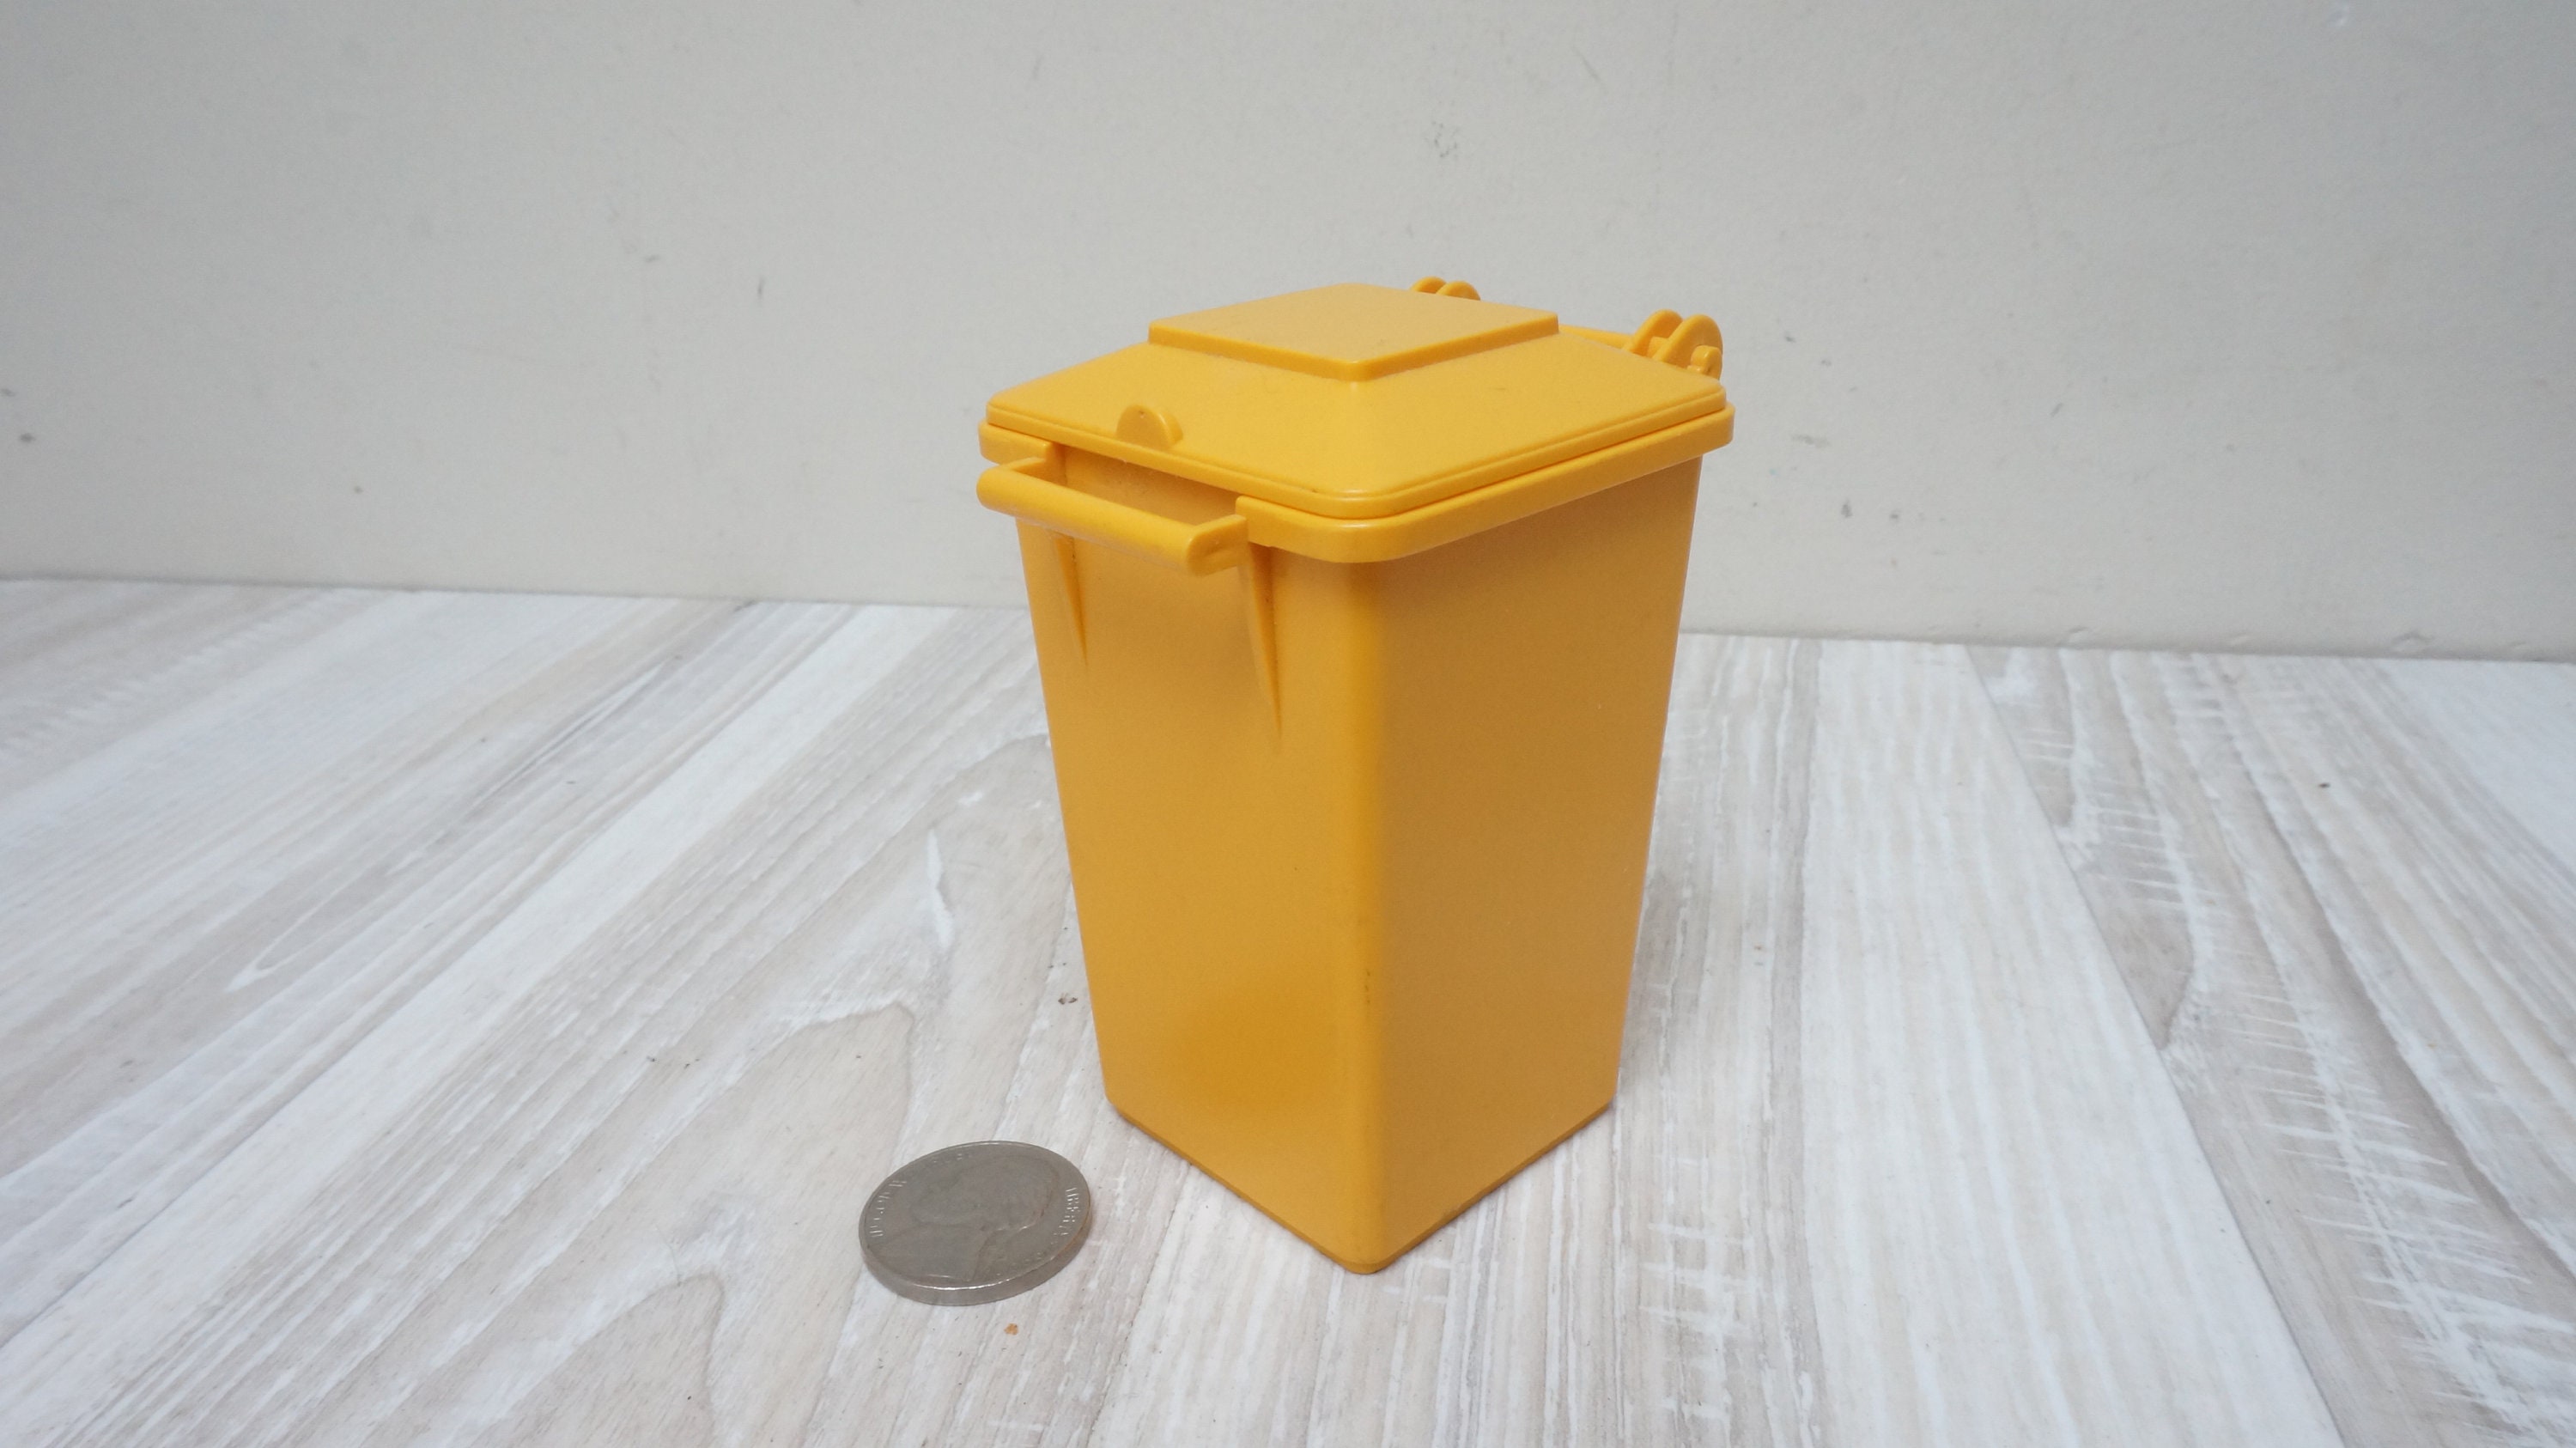 Garbage can scale - .de